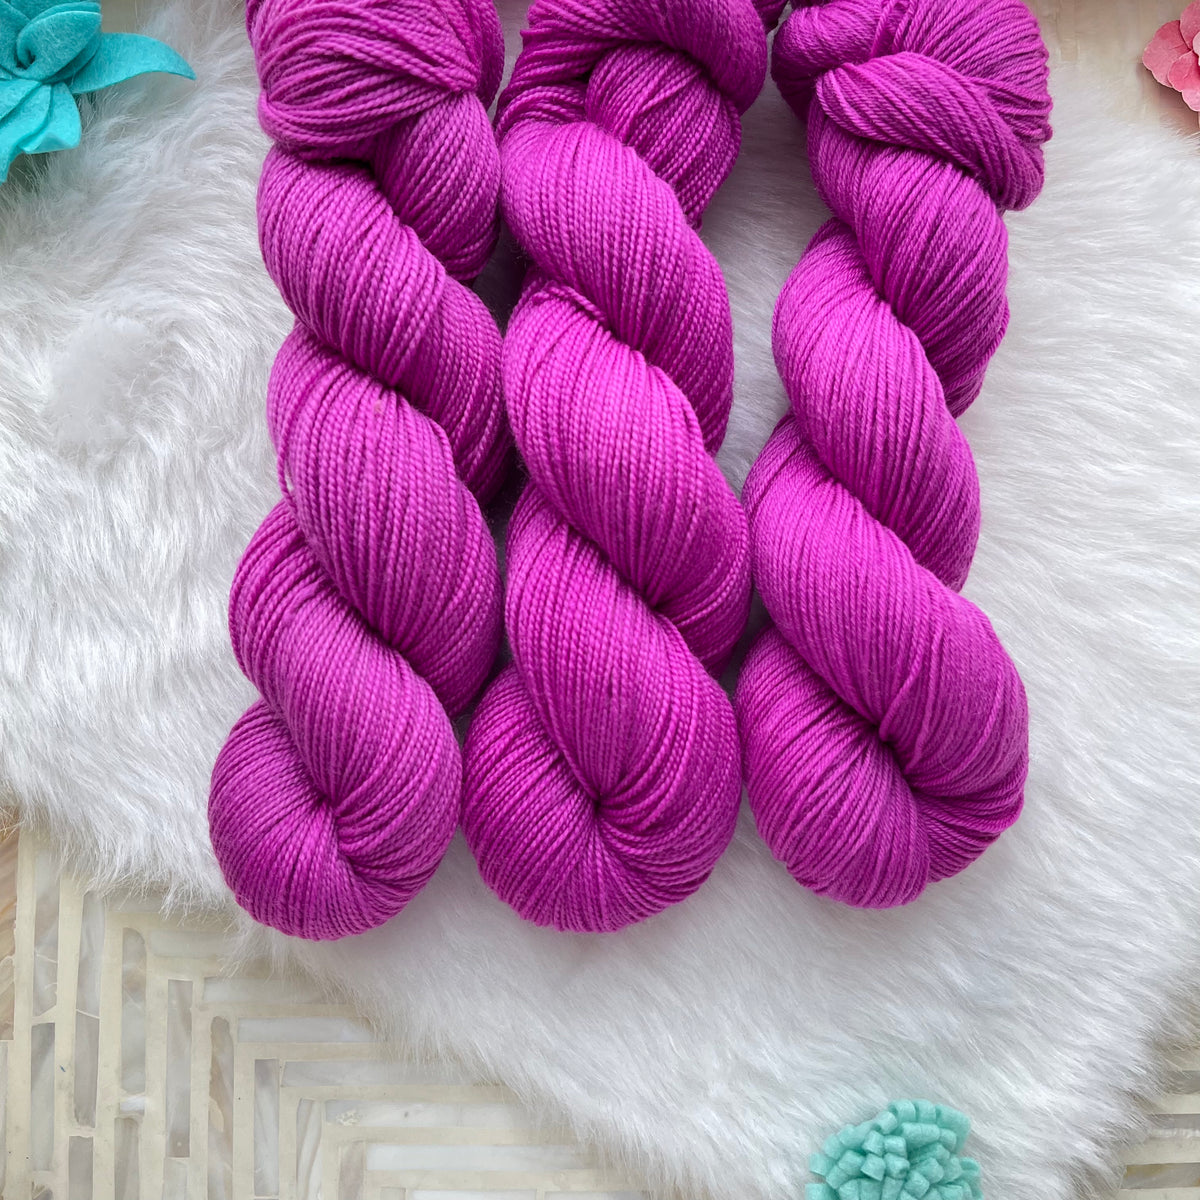 TODAY OR NEVER - Dyed to Order - Hand Dyed Yarn Skein